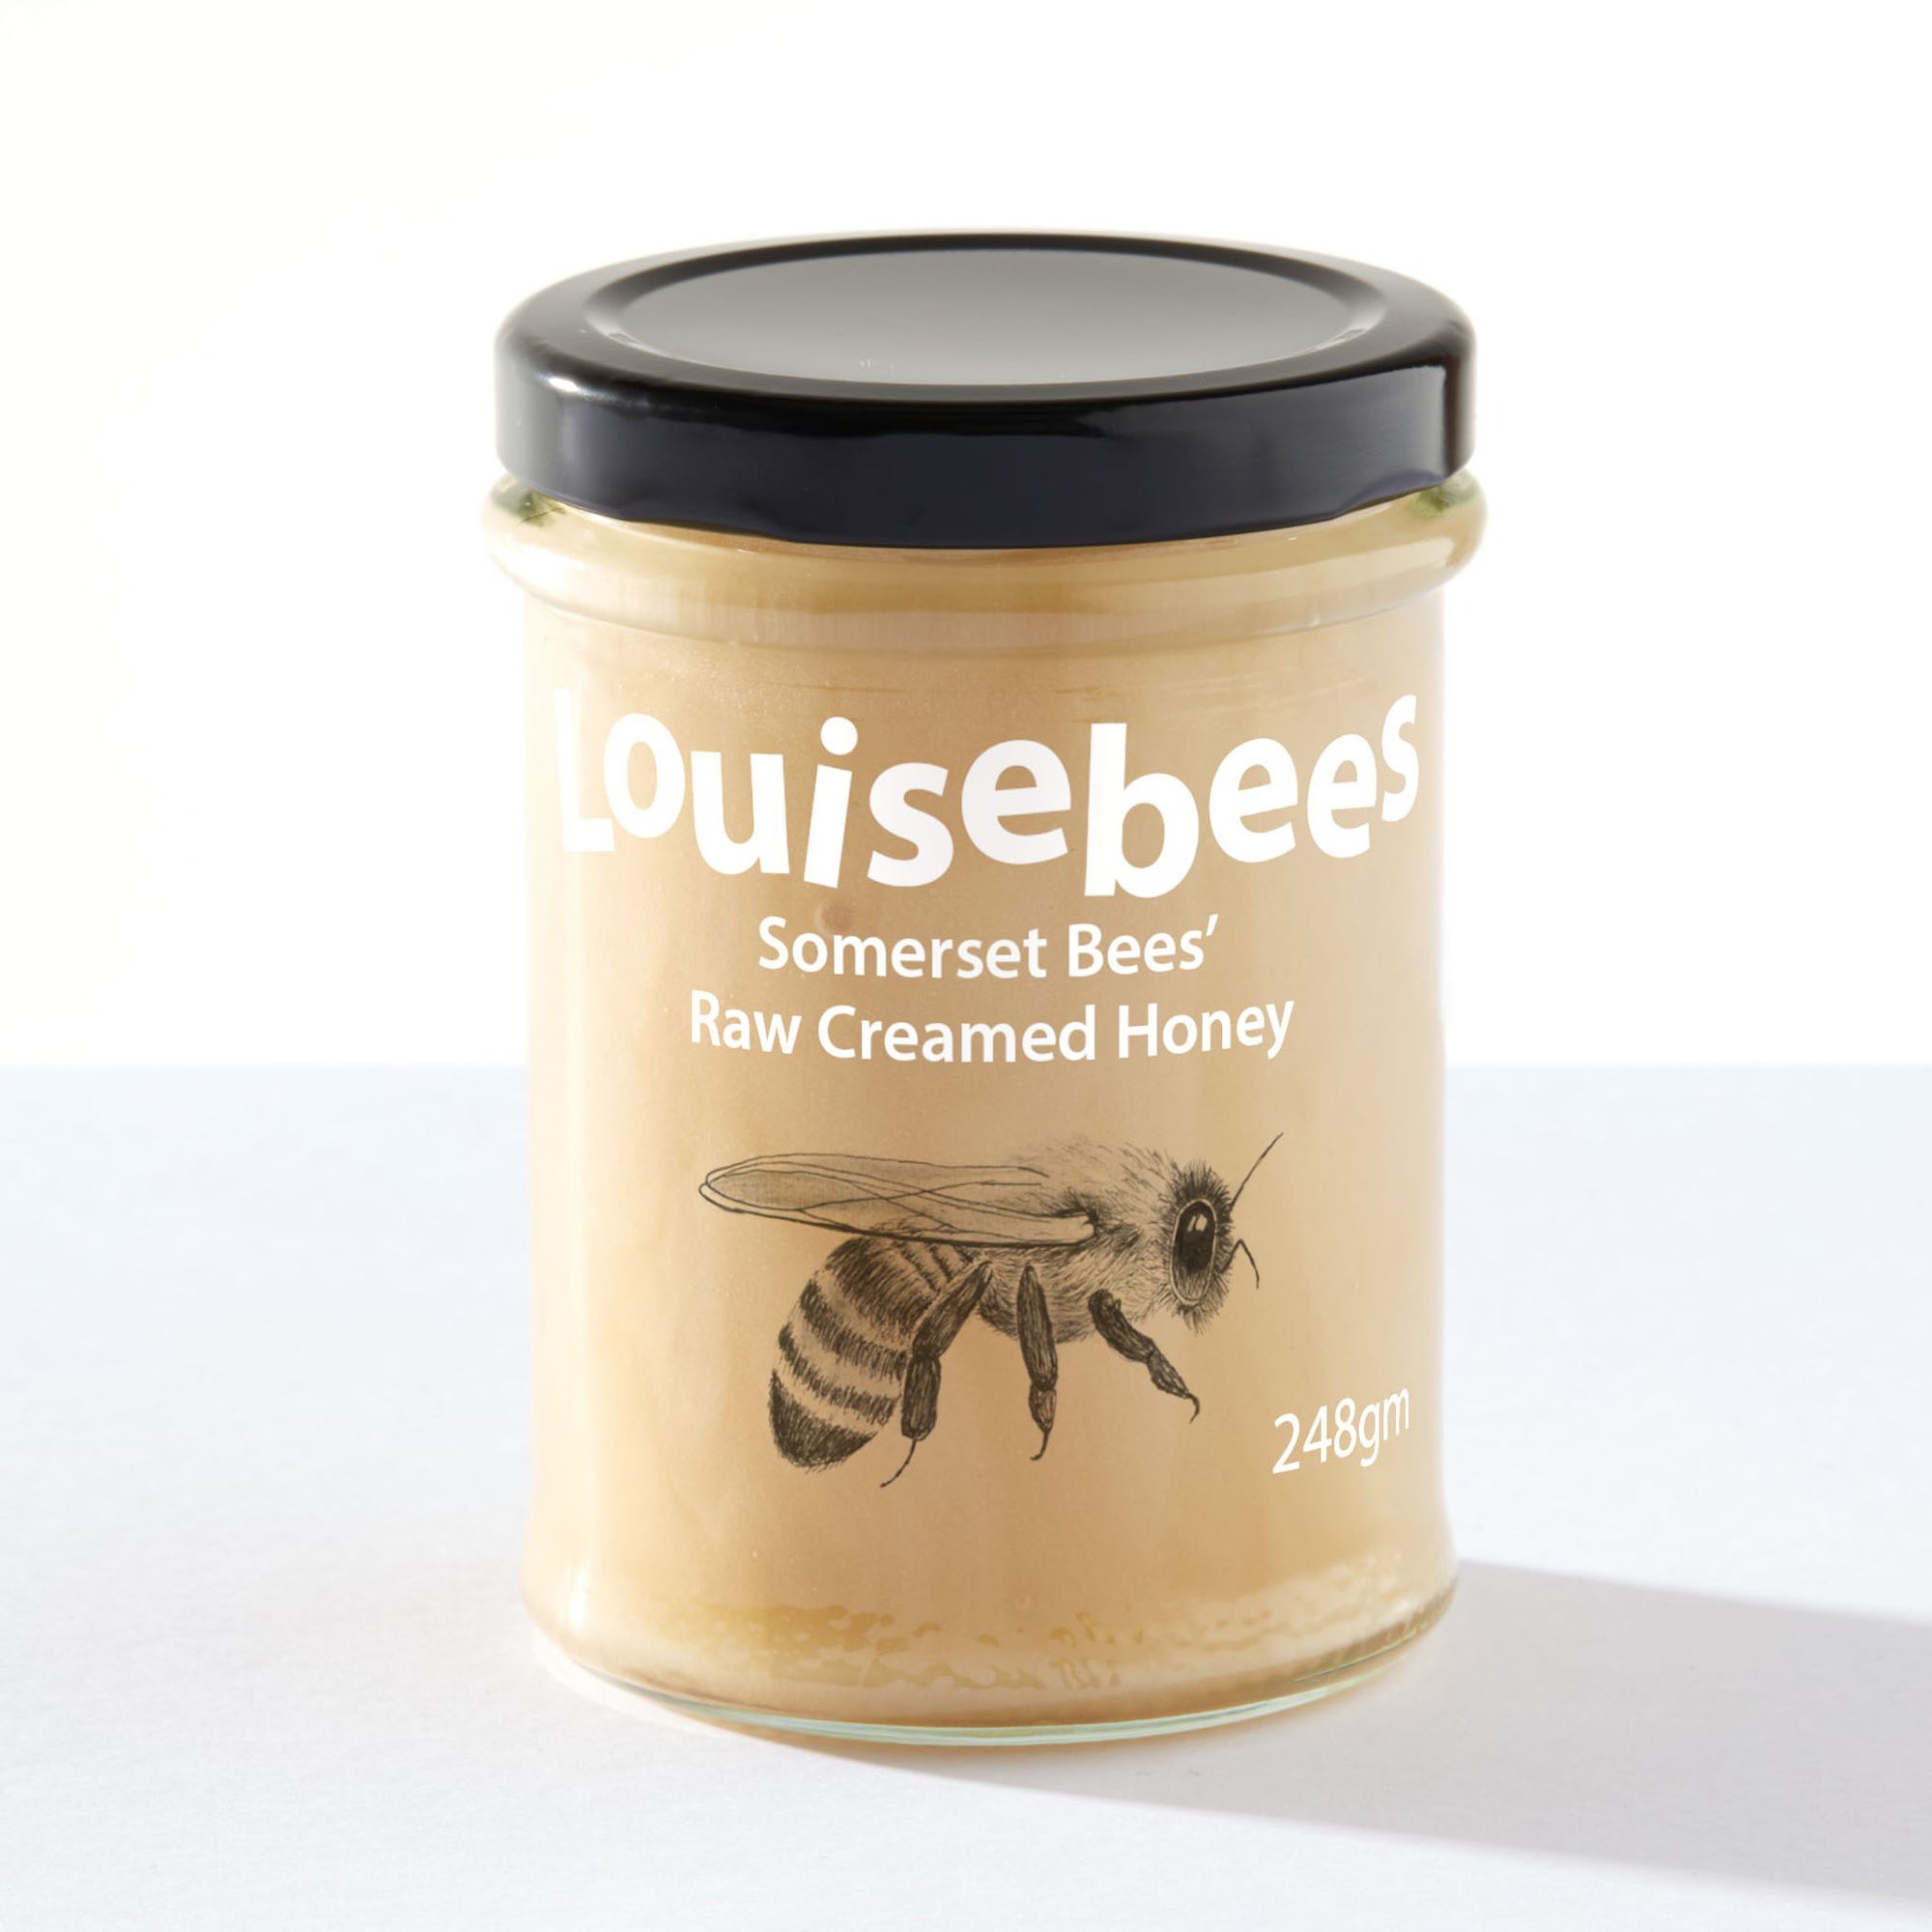 Somerset Bees Raw Creamed Honey - Louise Bees 240g